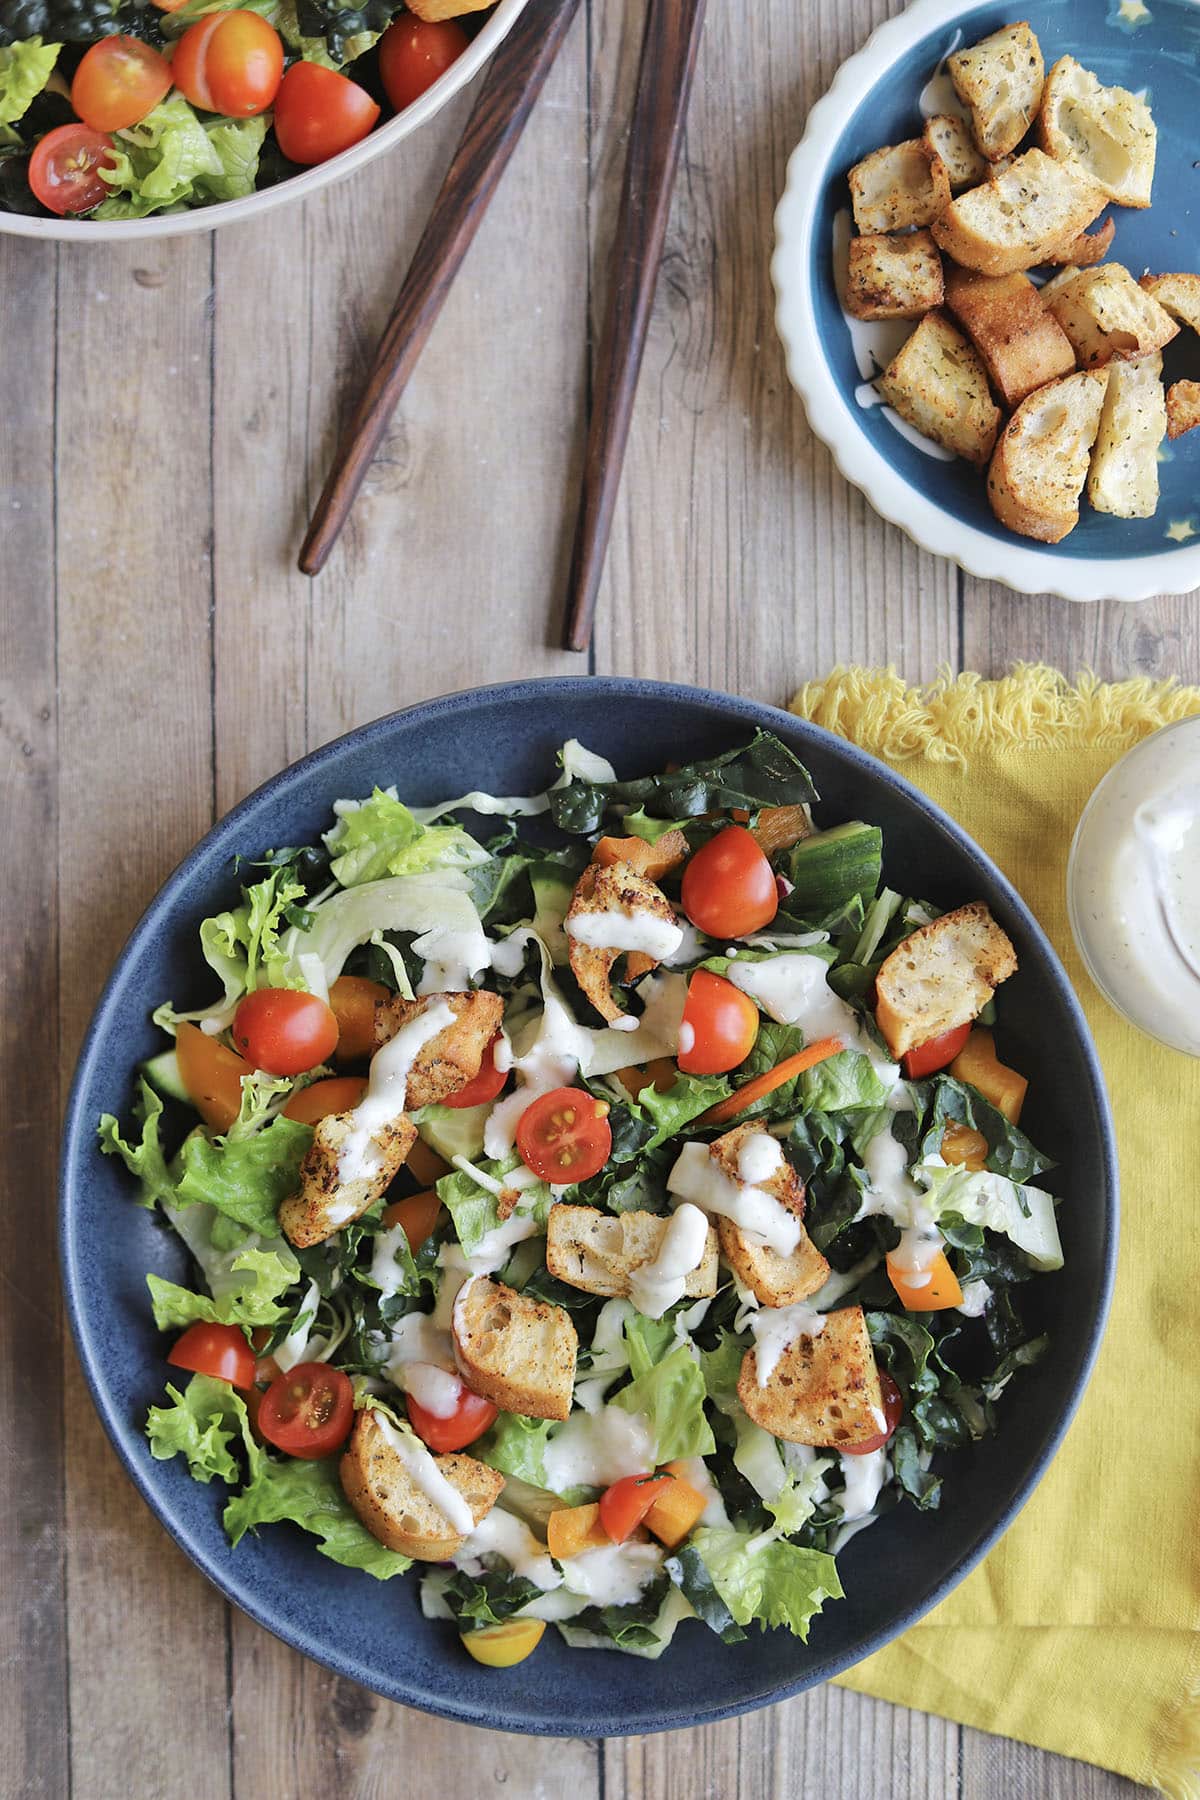 Bowl of salad topped in croutons and ranch dressing.